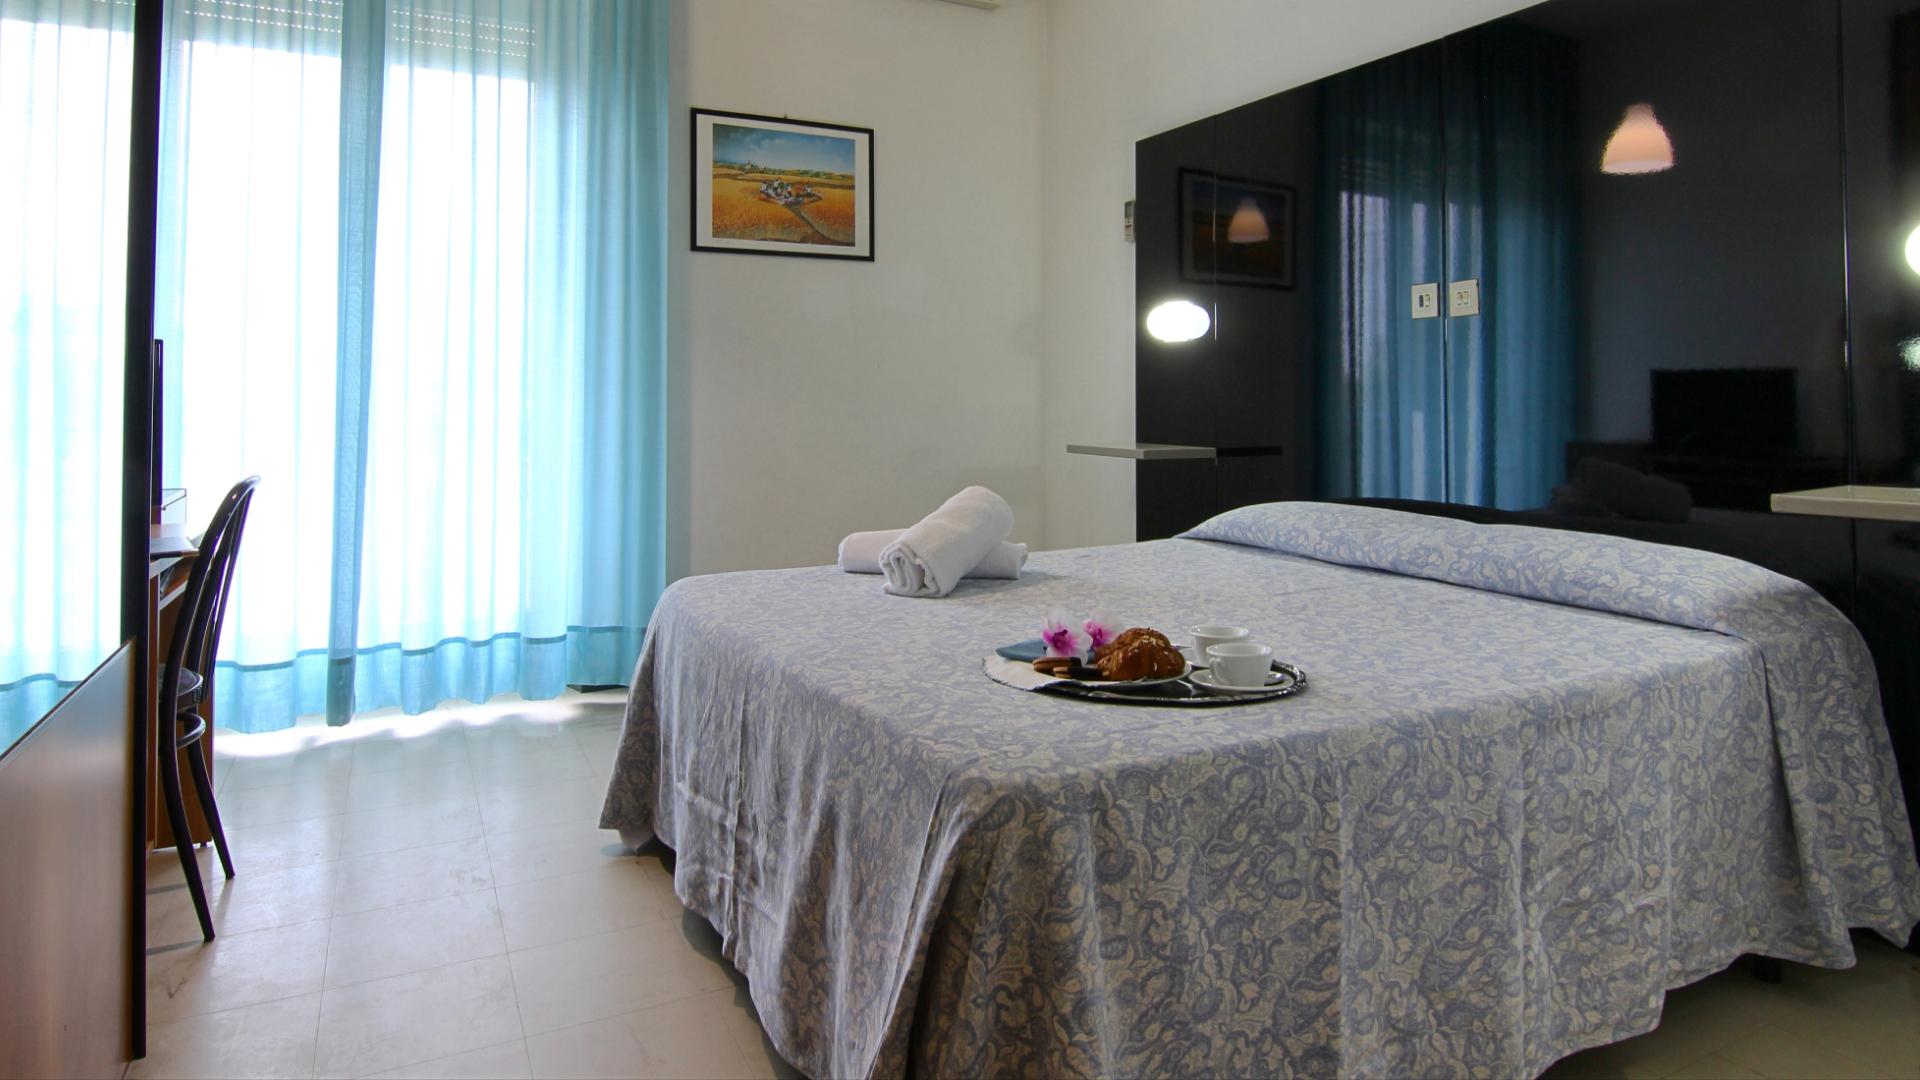 ghe en rooms-hotel-in-senigallia-by-the-sea 014